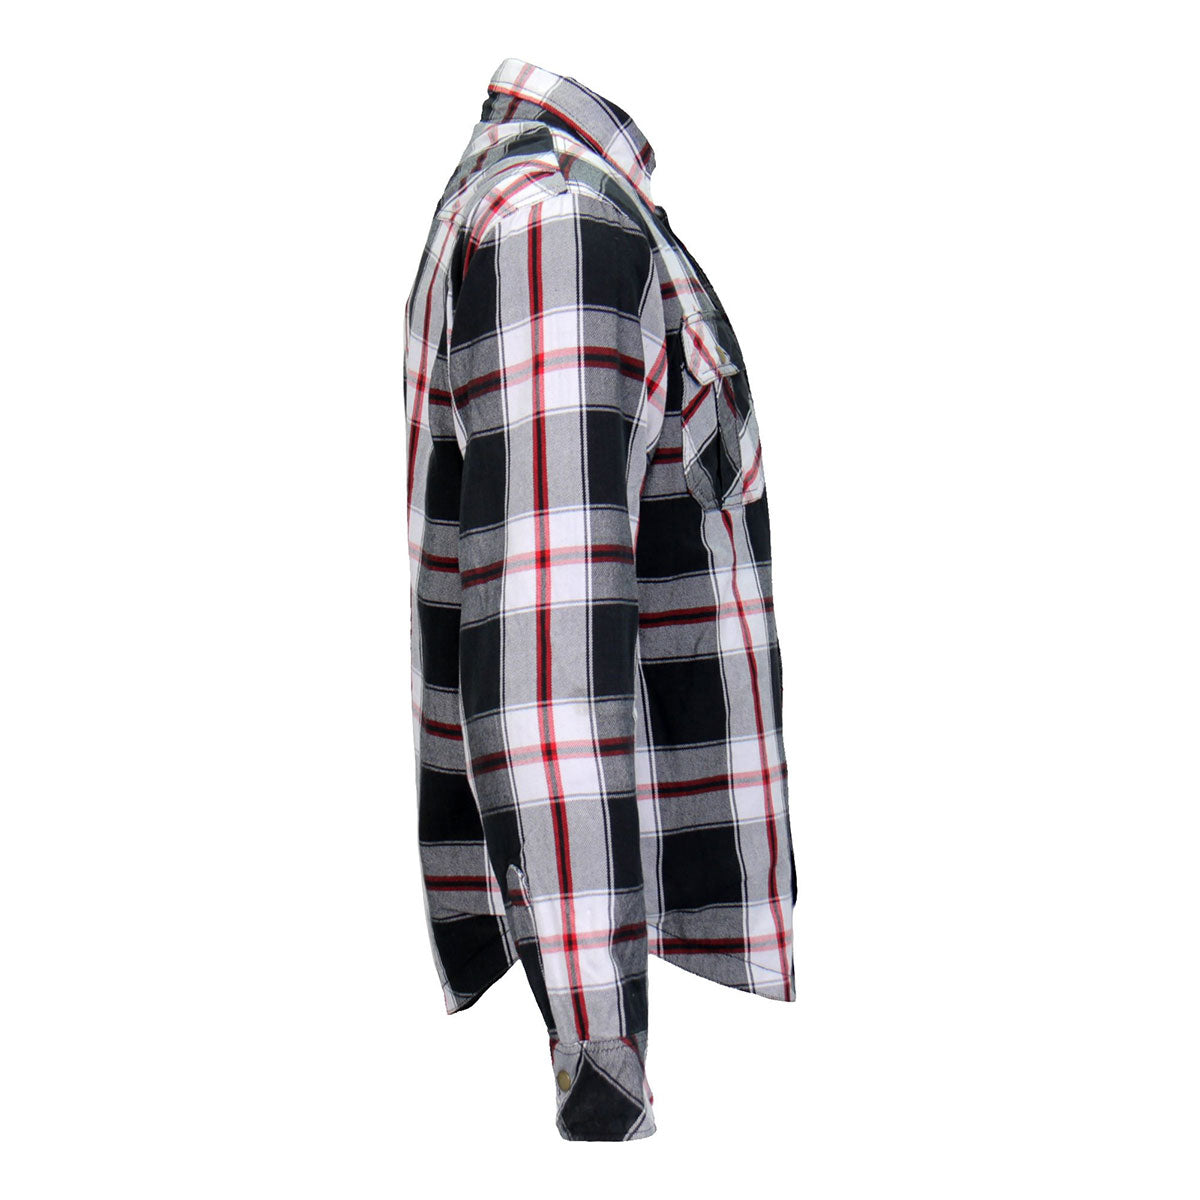 Hot Leathers JKM3001 Men's Red and White Flannel Motorcycle Shirt-Jacket w/ CE Armor Protection